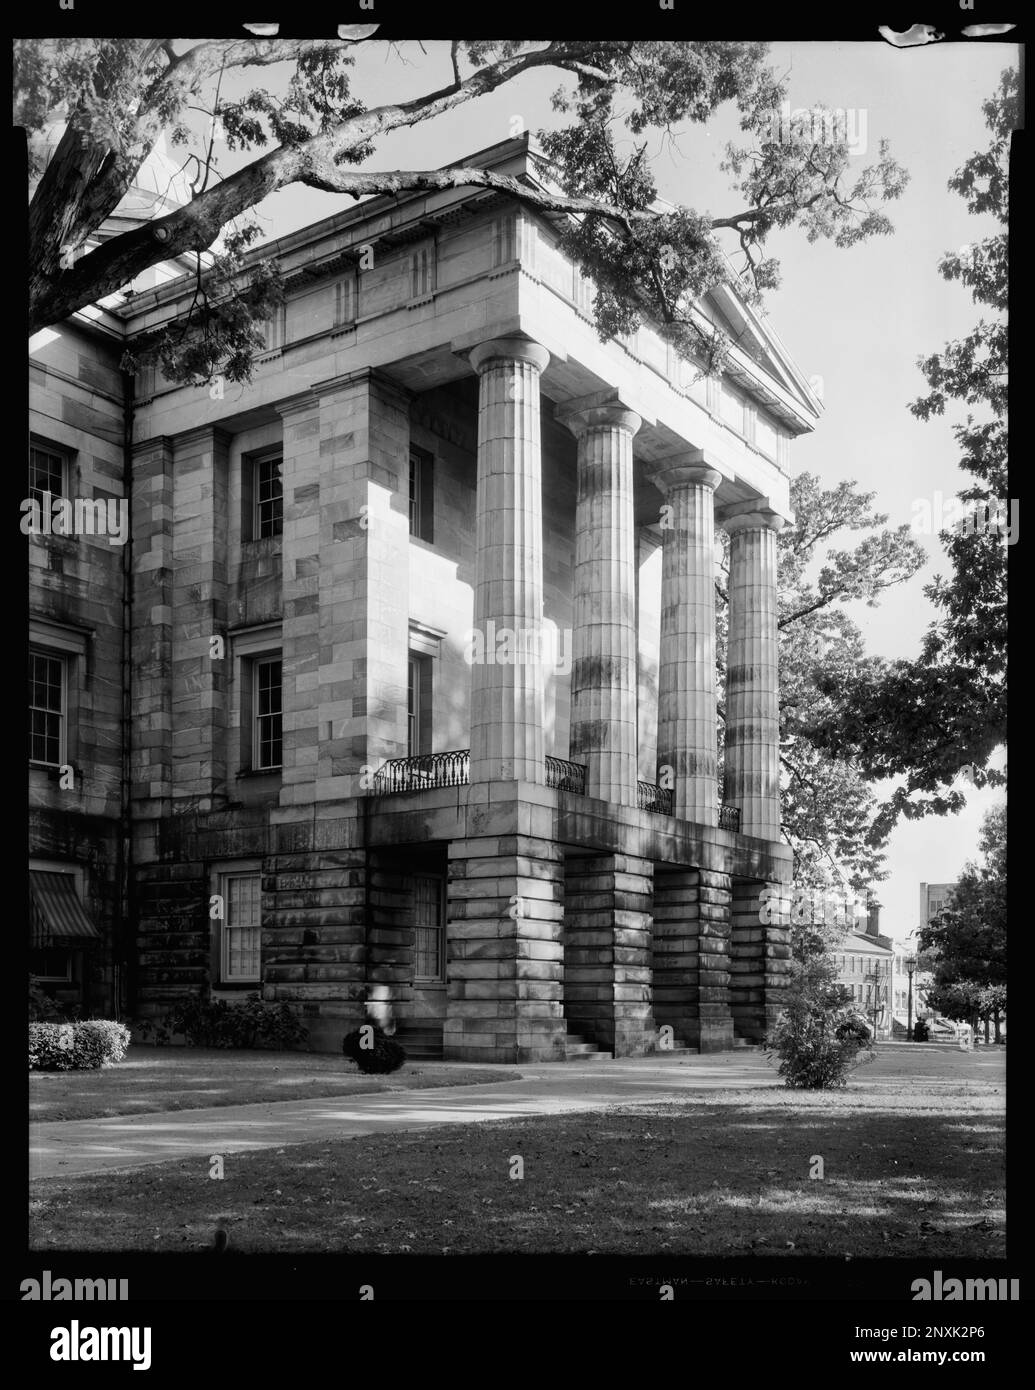 State Capitol, Raleigh, Wake County, North Carolina. Carnegie Survey of the Architecture of the South (Carnegie-Umfrage zur Architektur des Südens). United States North Carolina Wake County Raleigh, Capitols, Säulen, Porticoes, Porches. Stockfoto